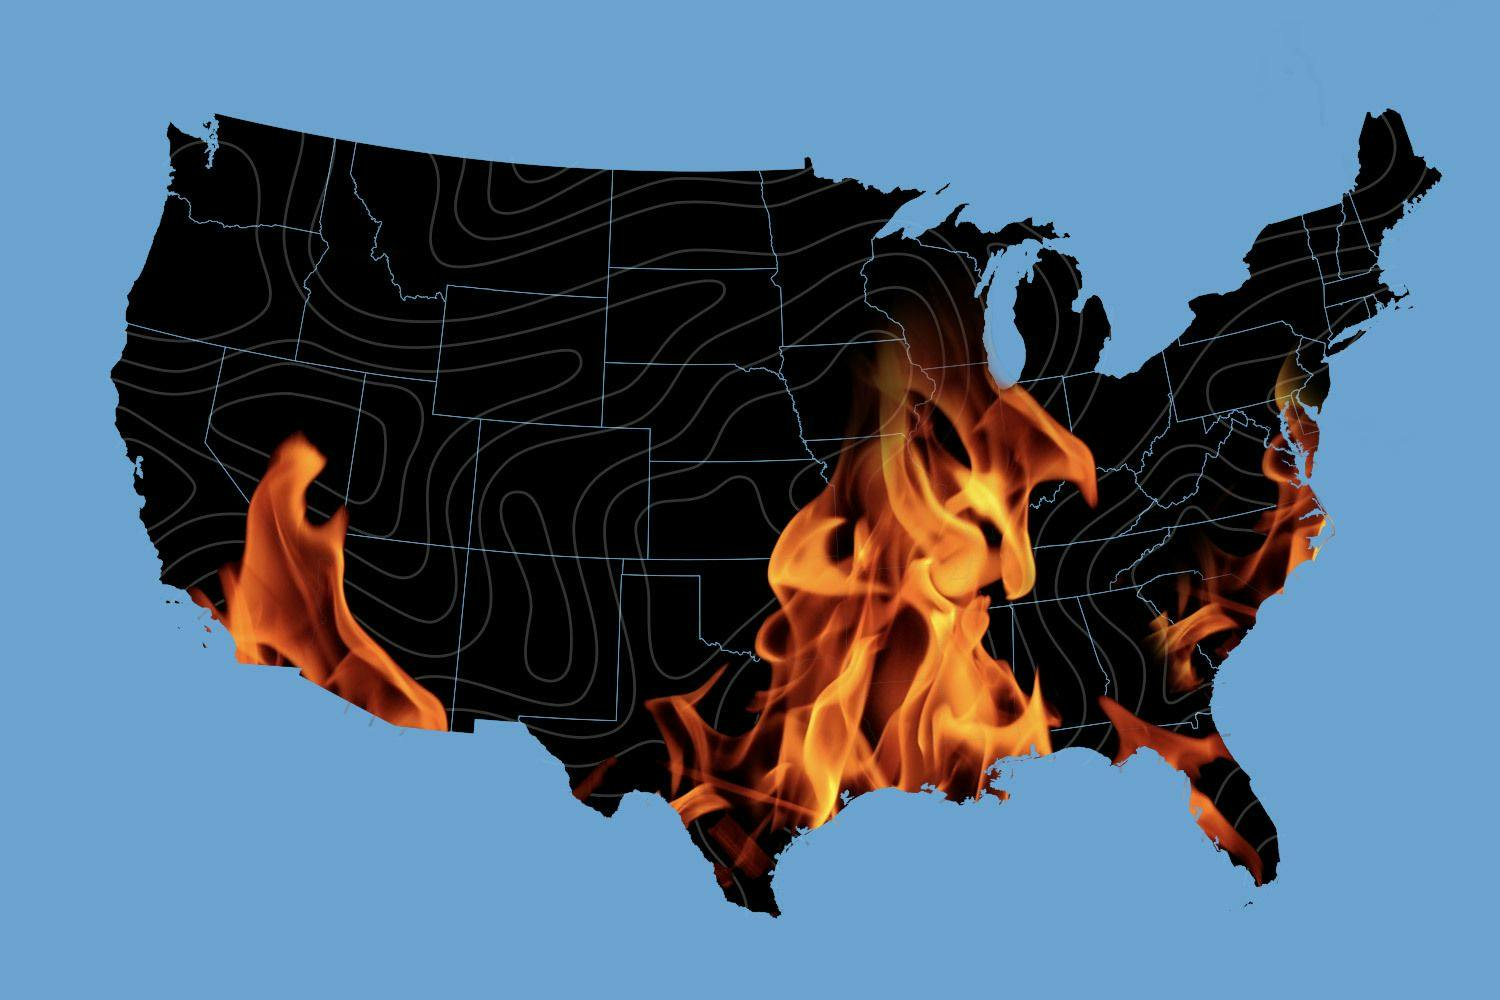 A map of the US showing the "Extreme Heat Belt" on fire